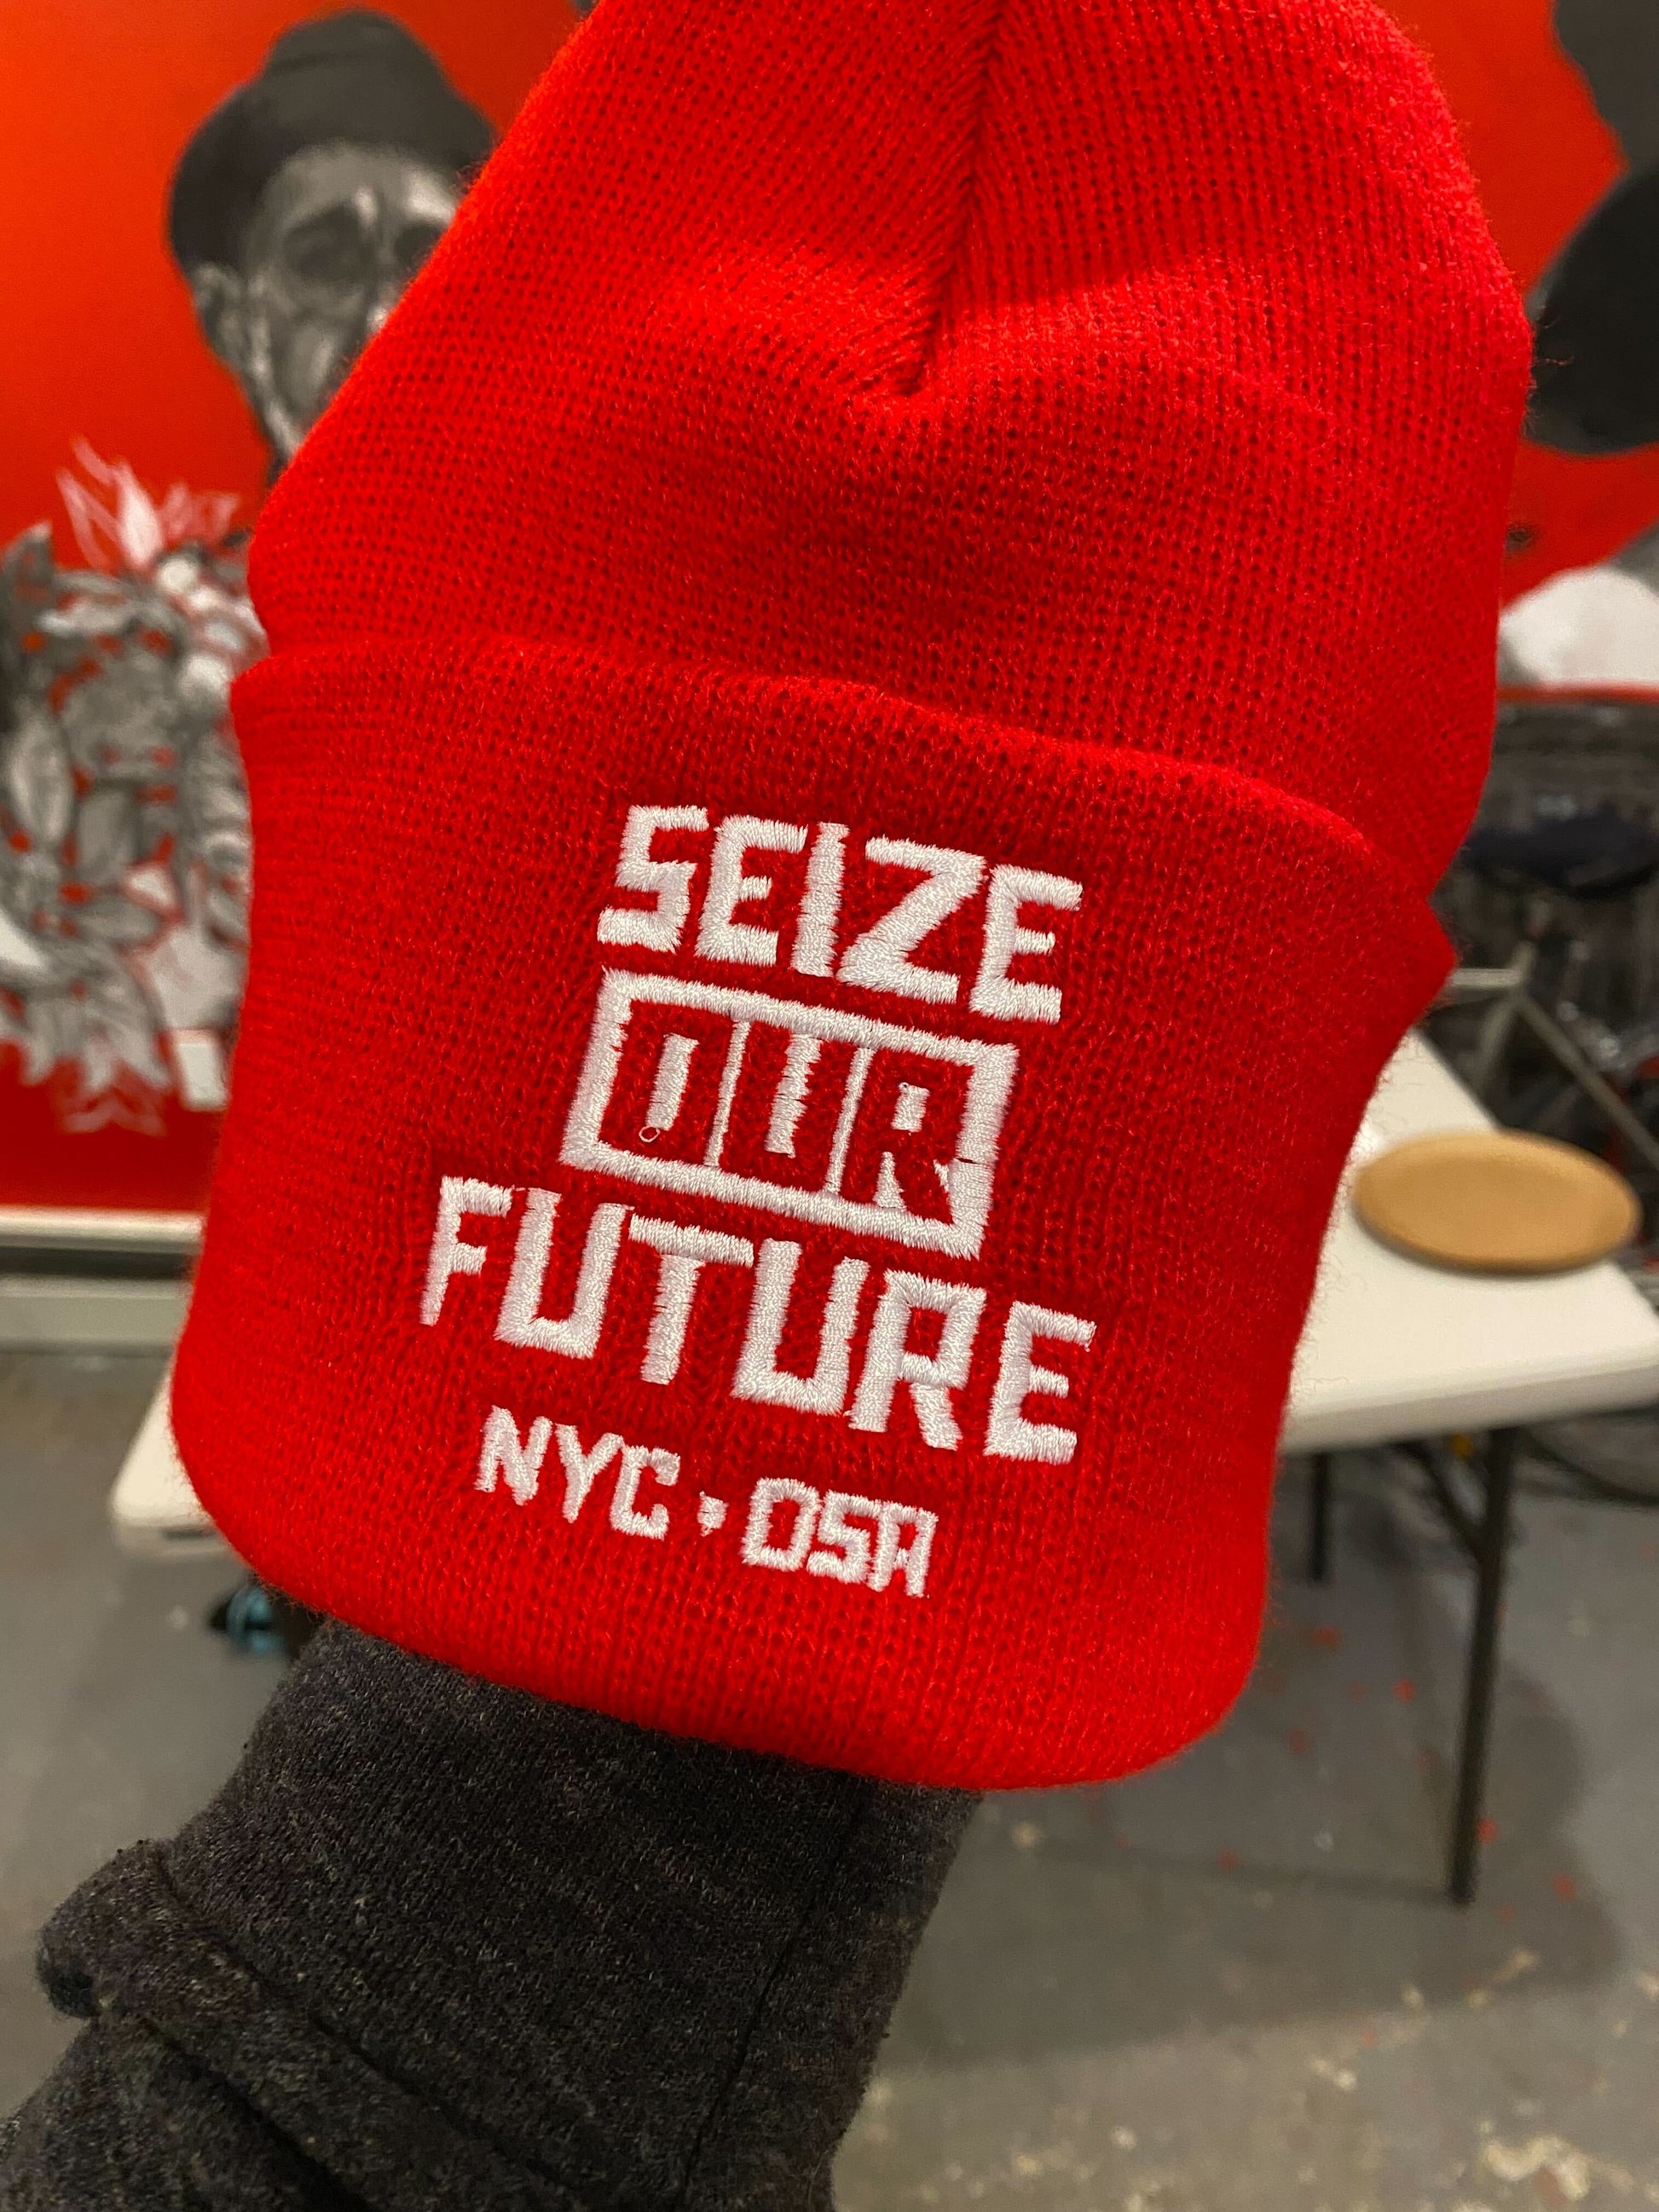 reverse side of beanie with logo: Seize our Future NYC-DSA